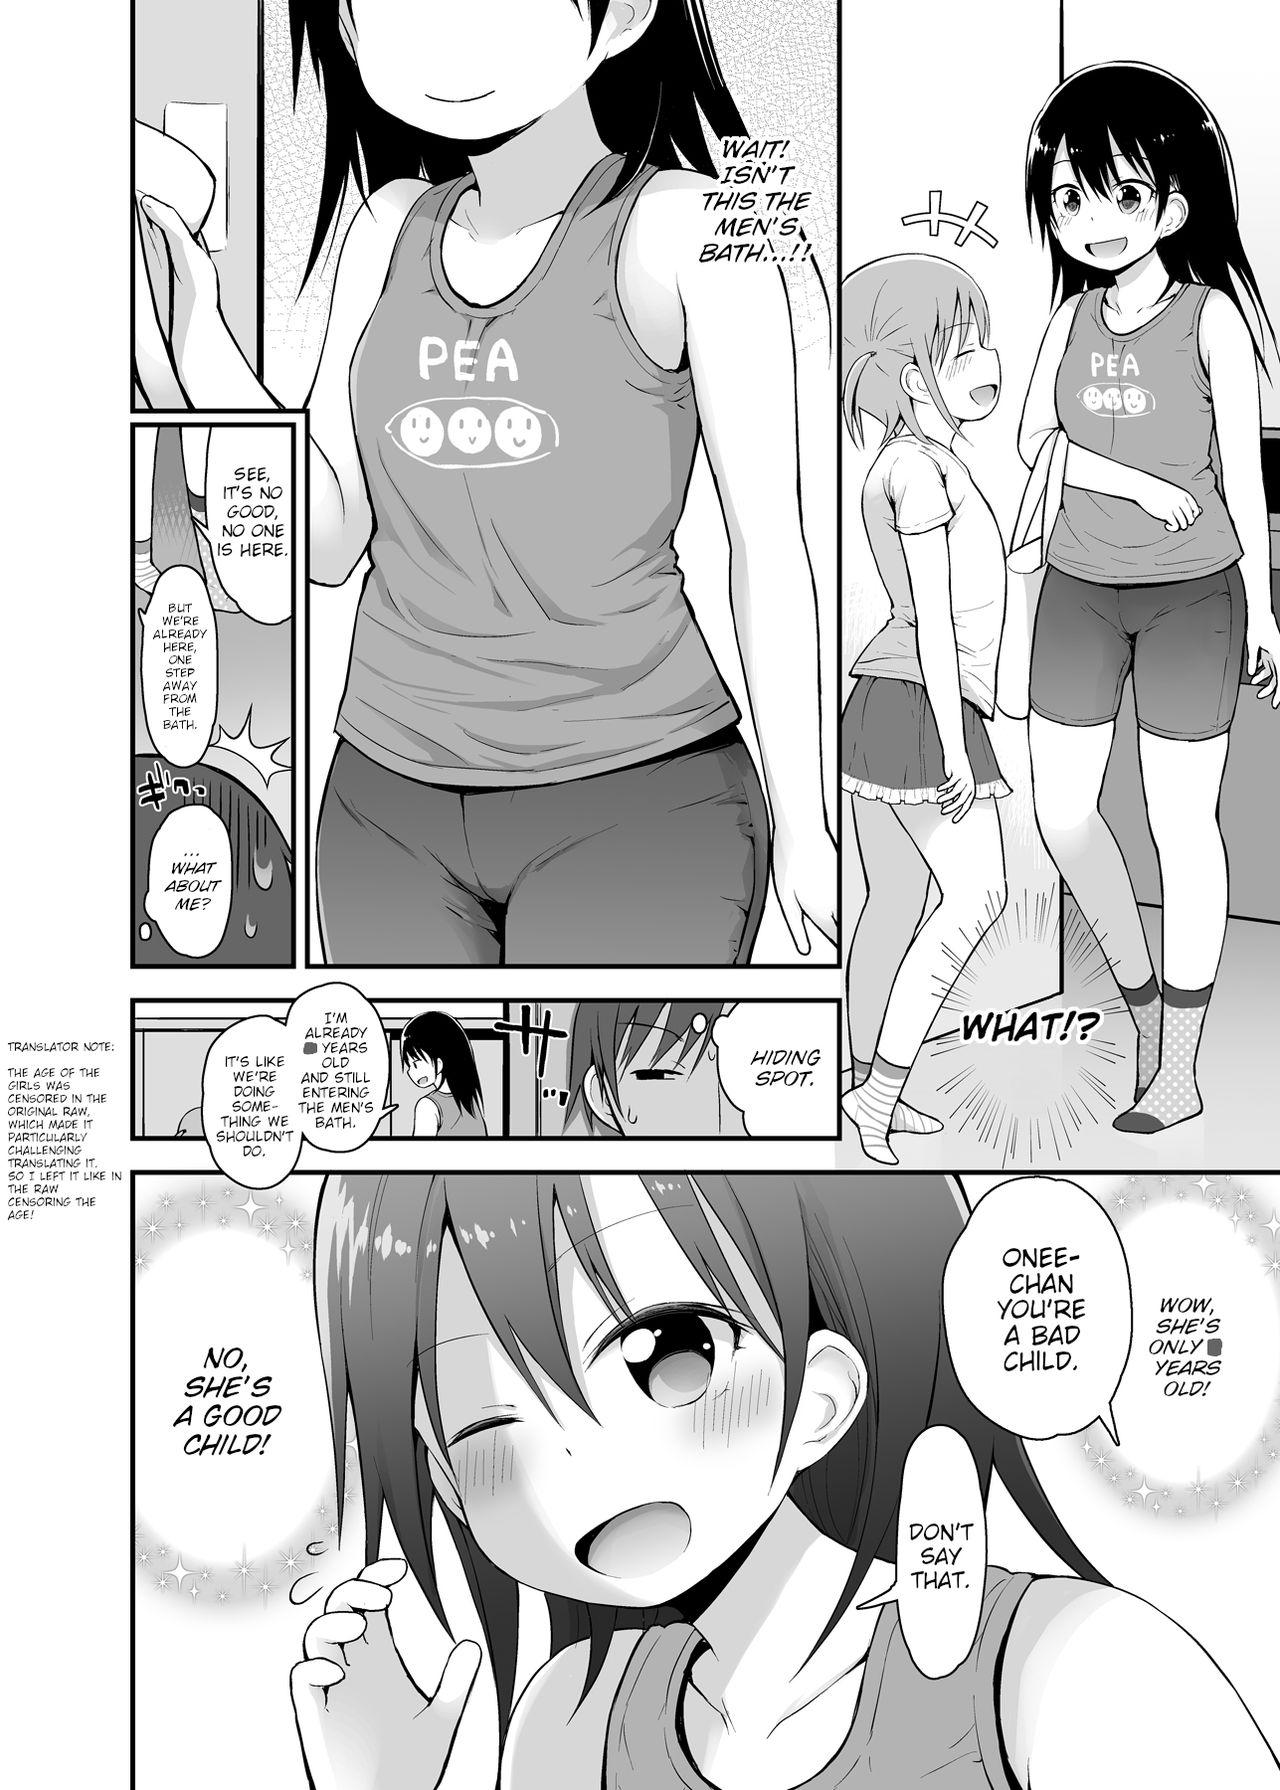 Free Hardcore Onnanoko datte Otokoyu ni Hairitai 3 | They may just be little girls, but they still want to enter the men's bath! 3 - Original Negao - Page 3